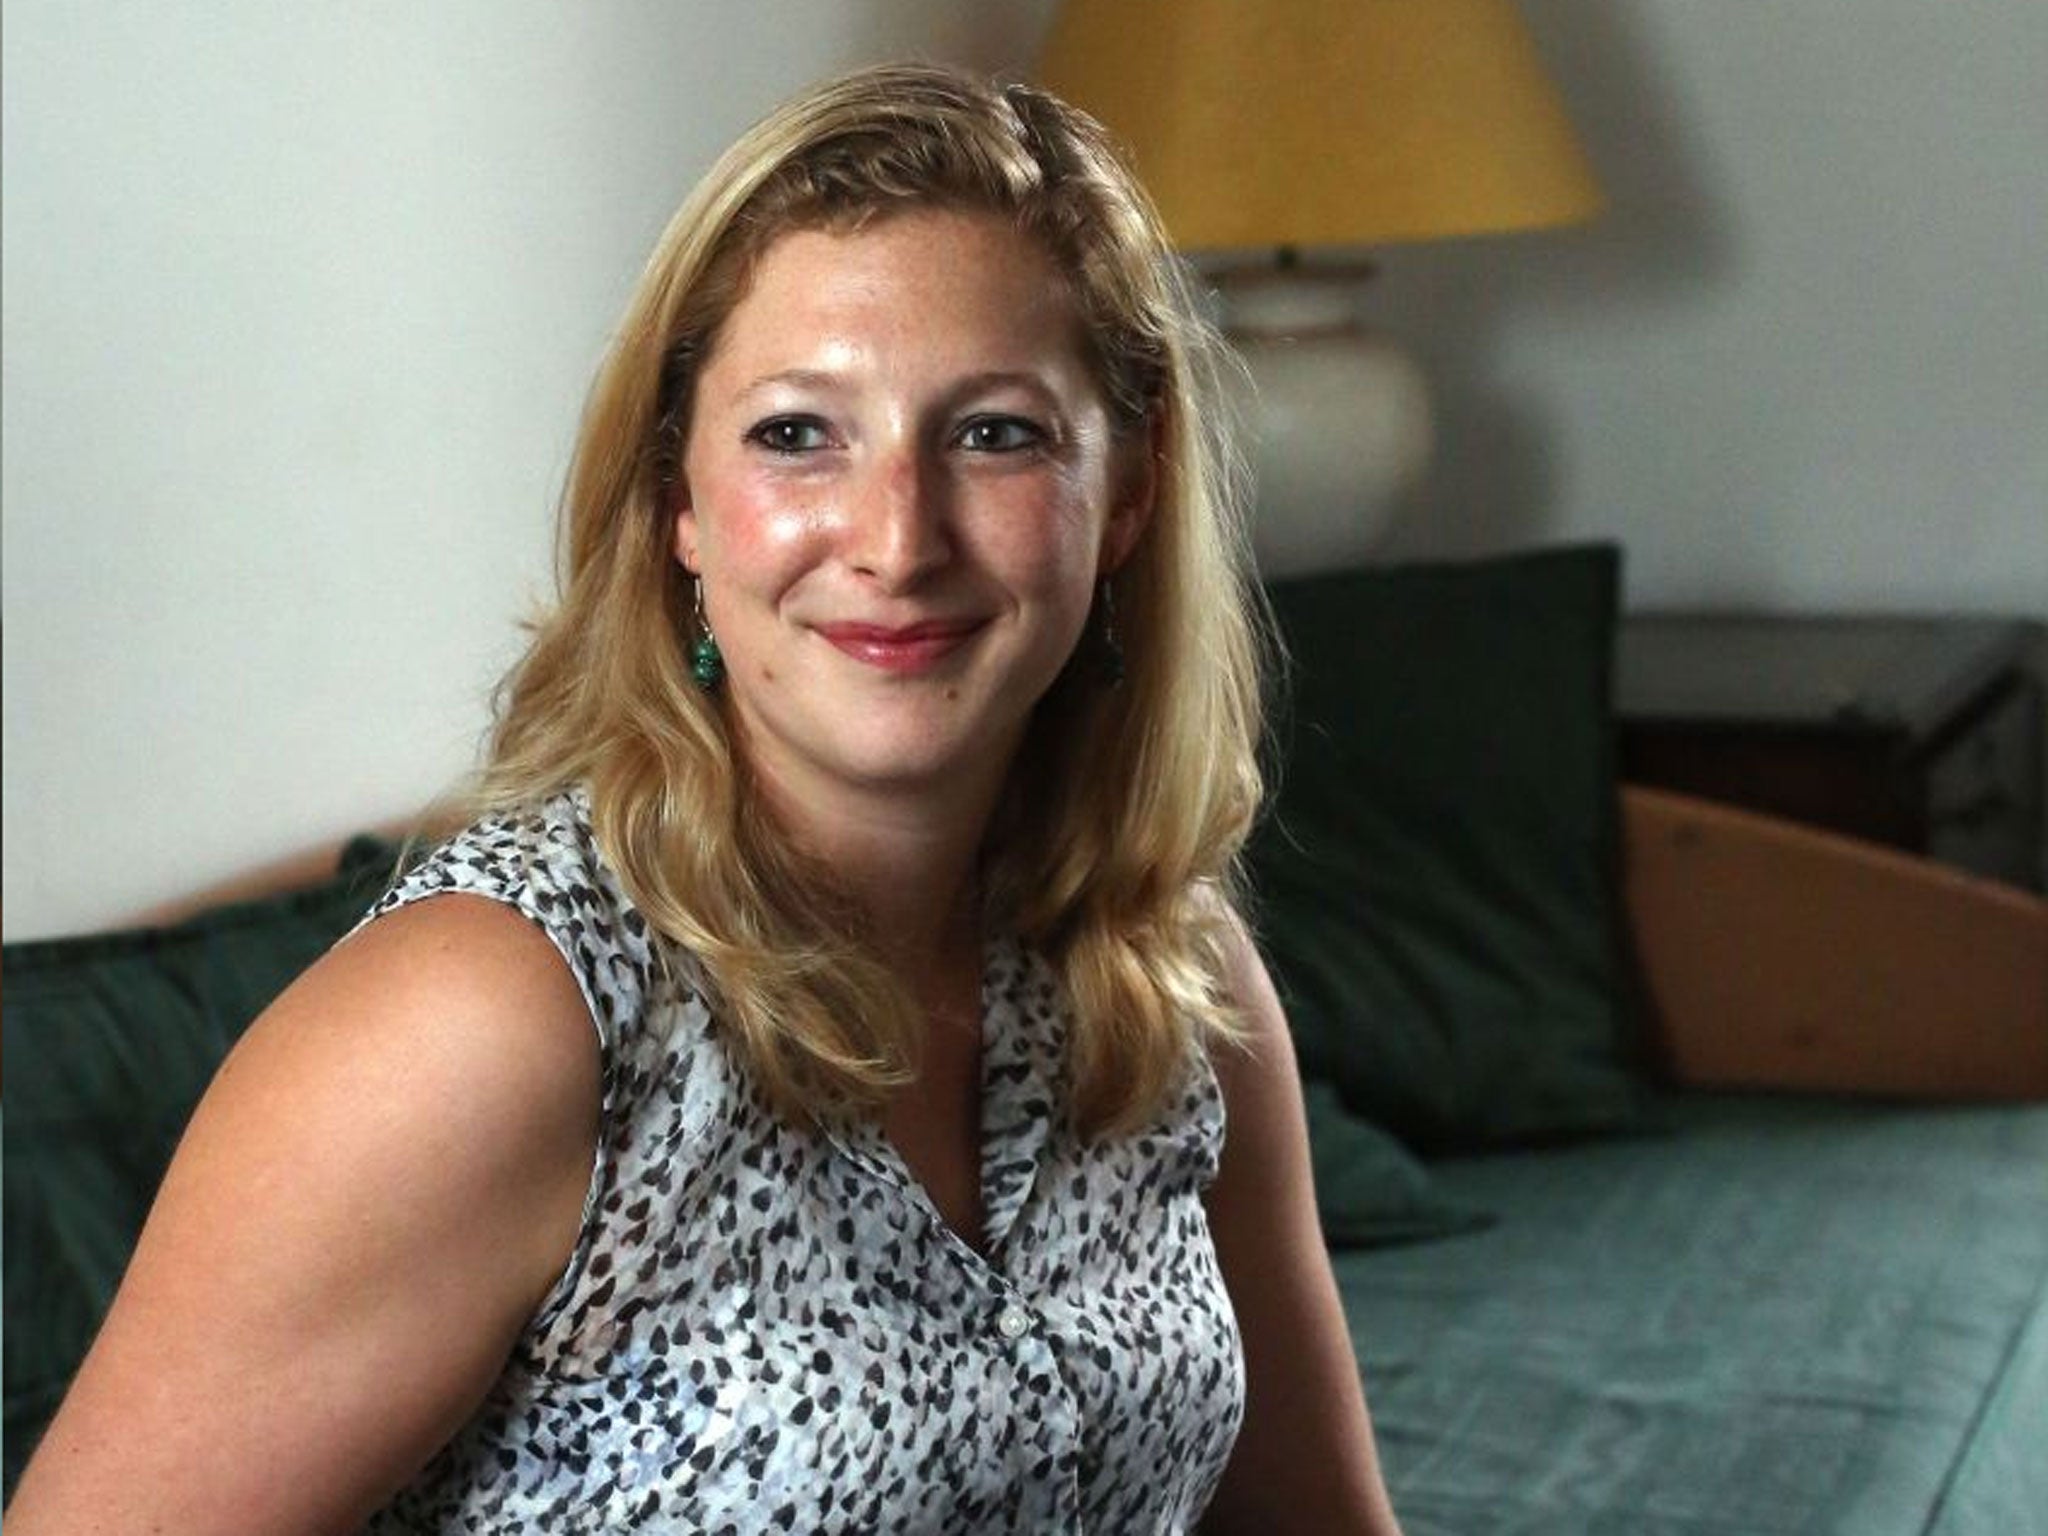 Sophie Williams should look at long-term investments as she searches for her first home